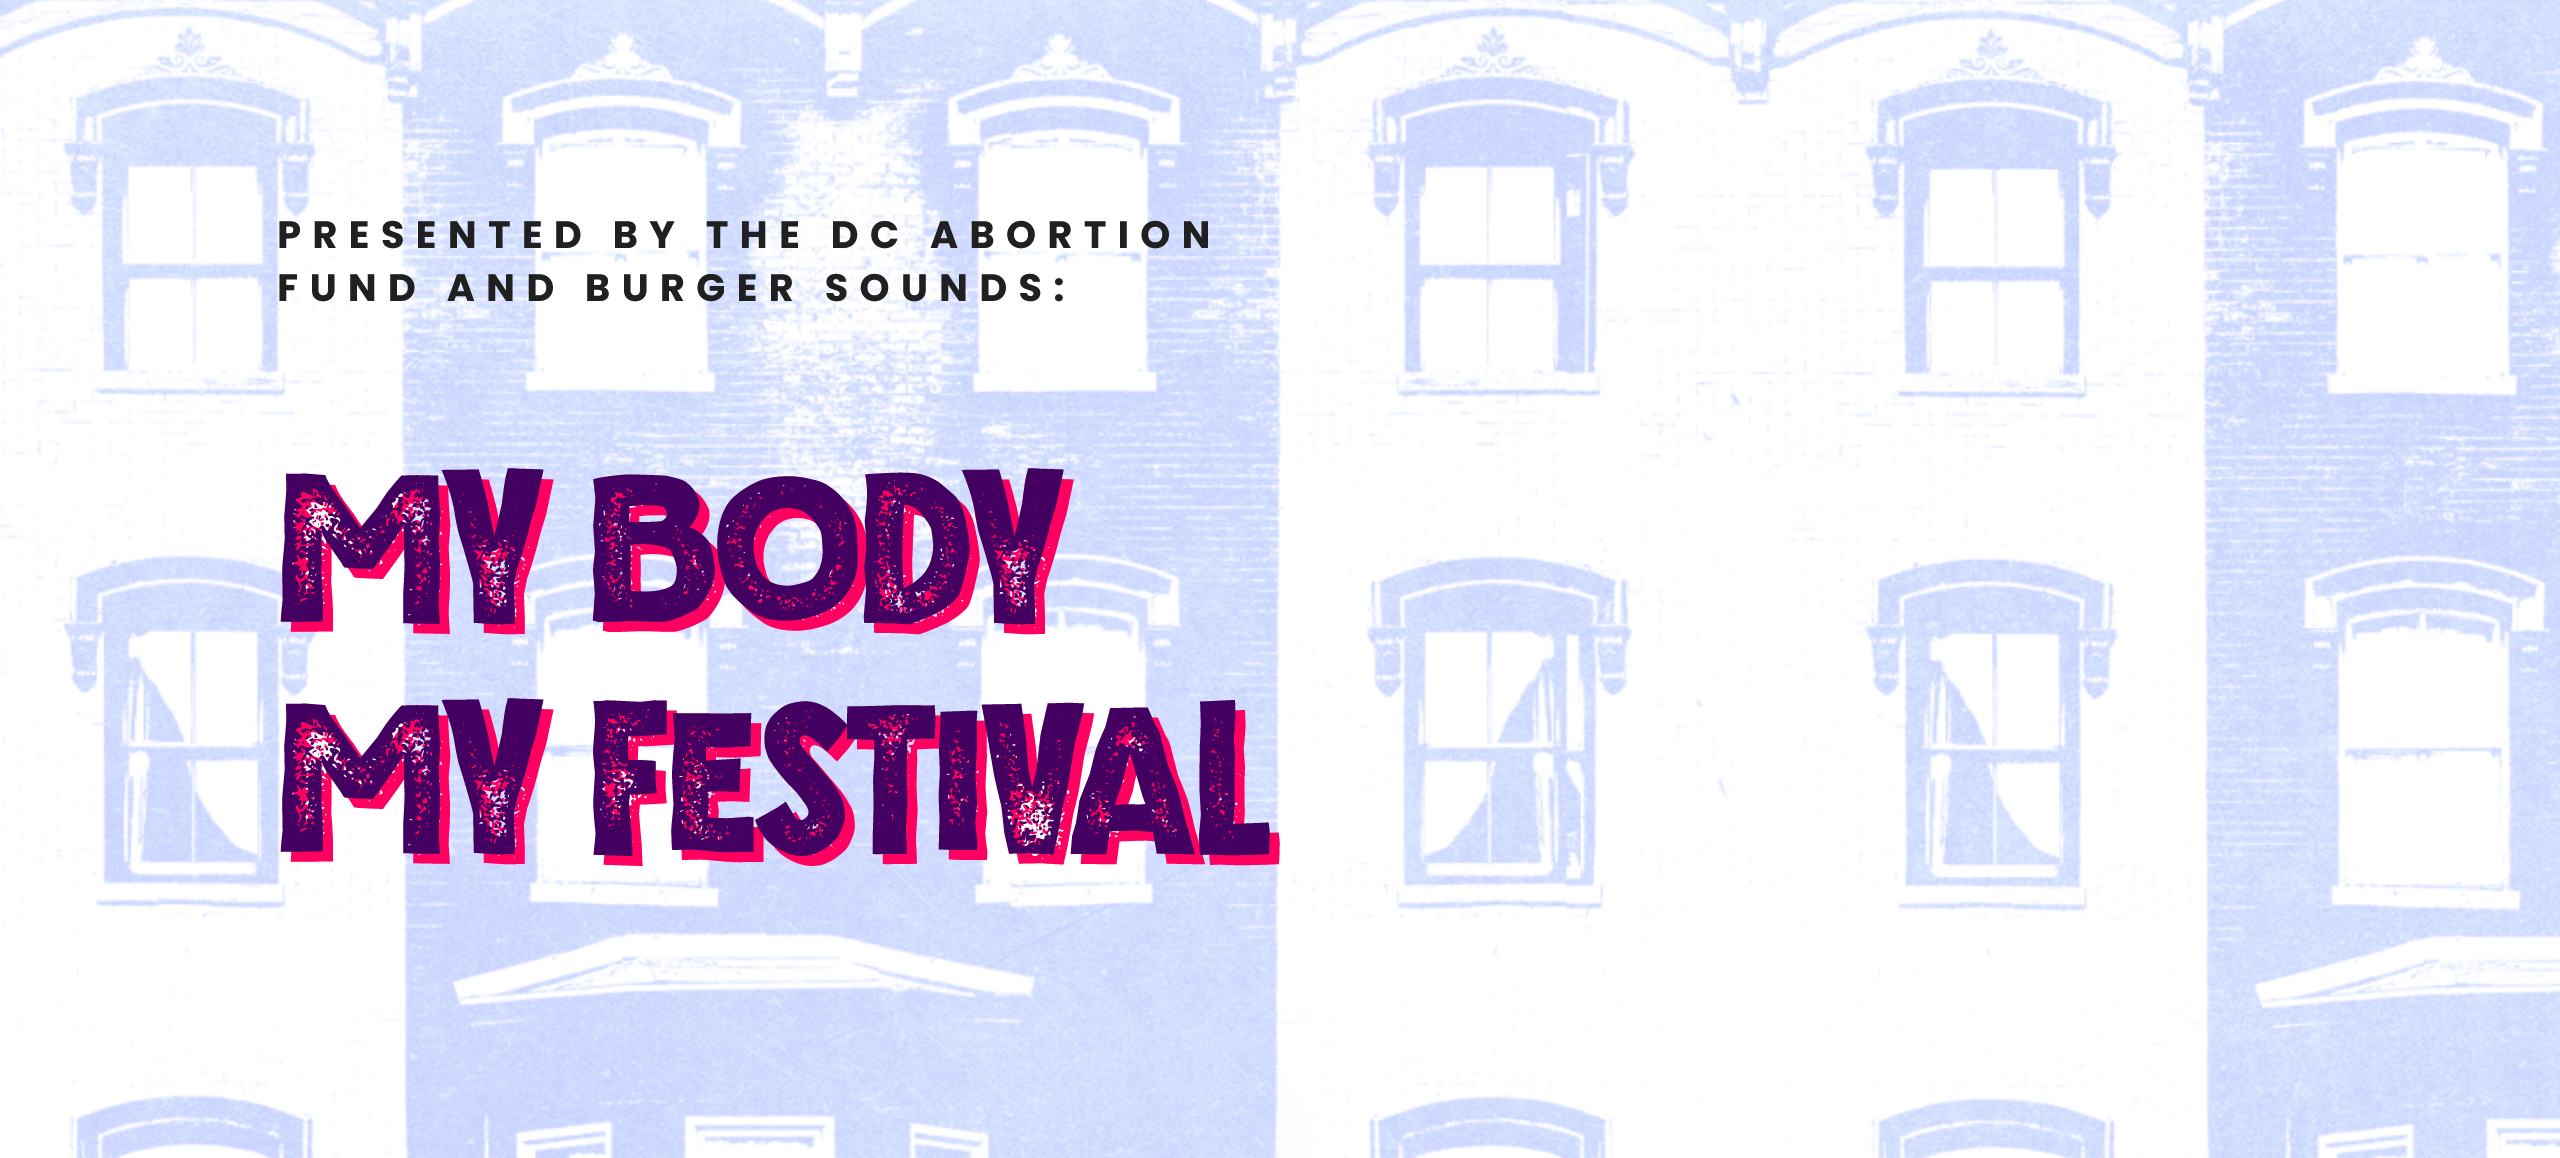 My Body My Festival: Presented by DC Abortion Fund